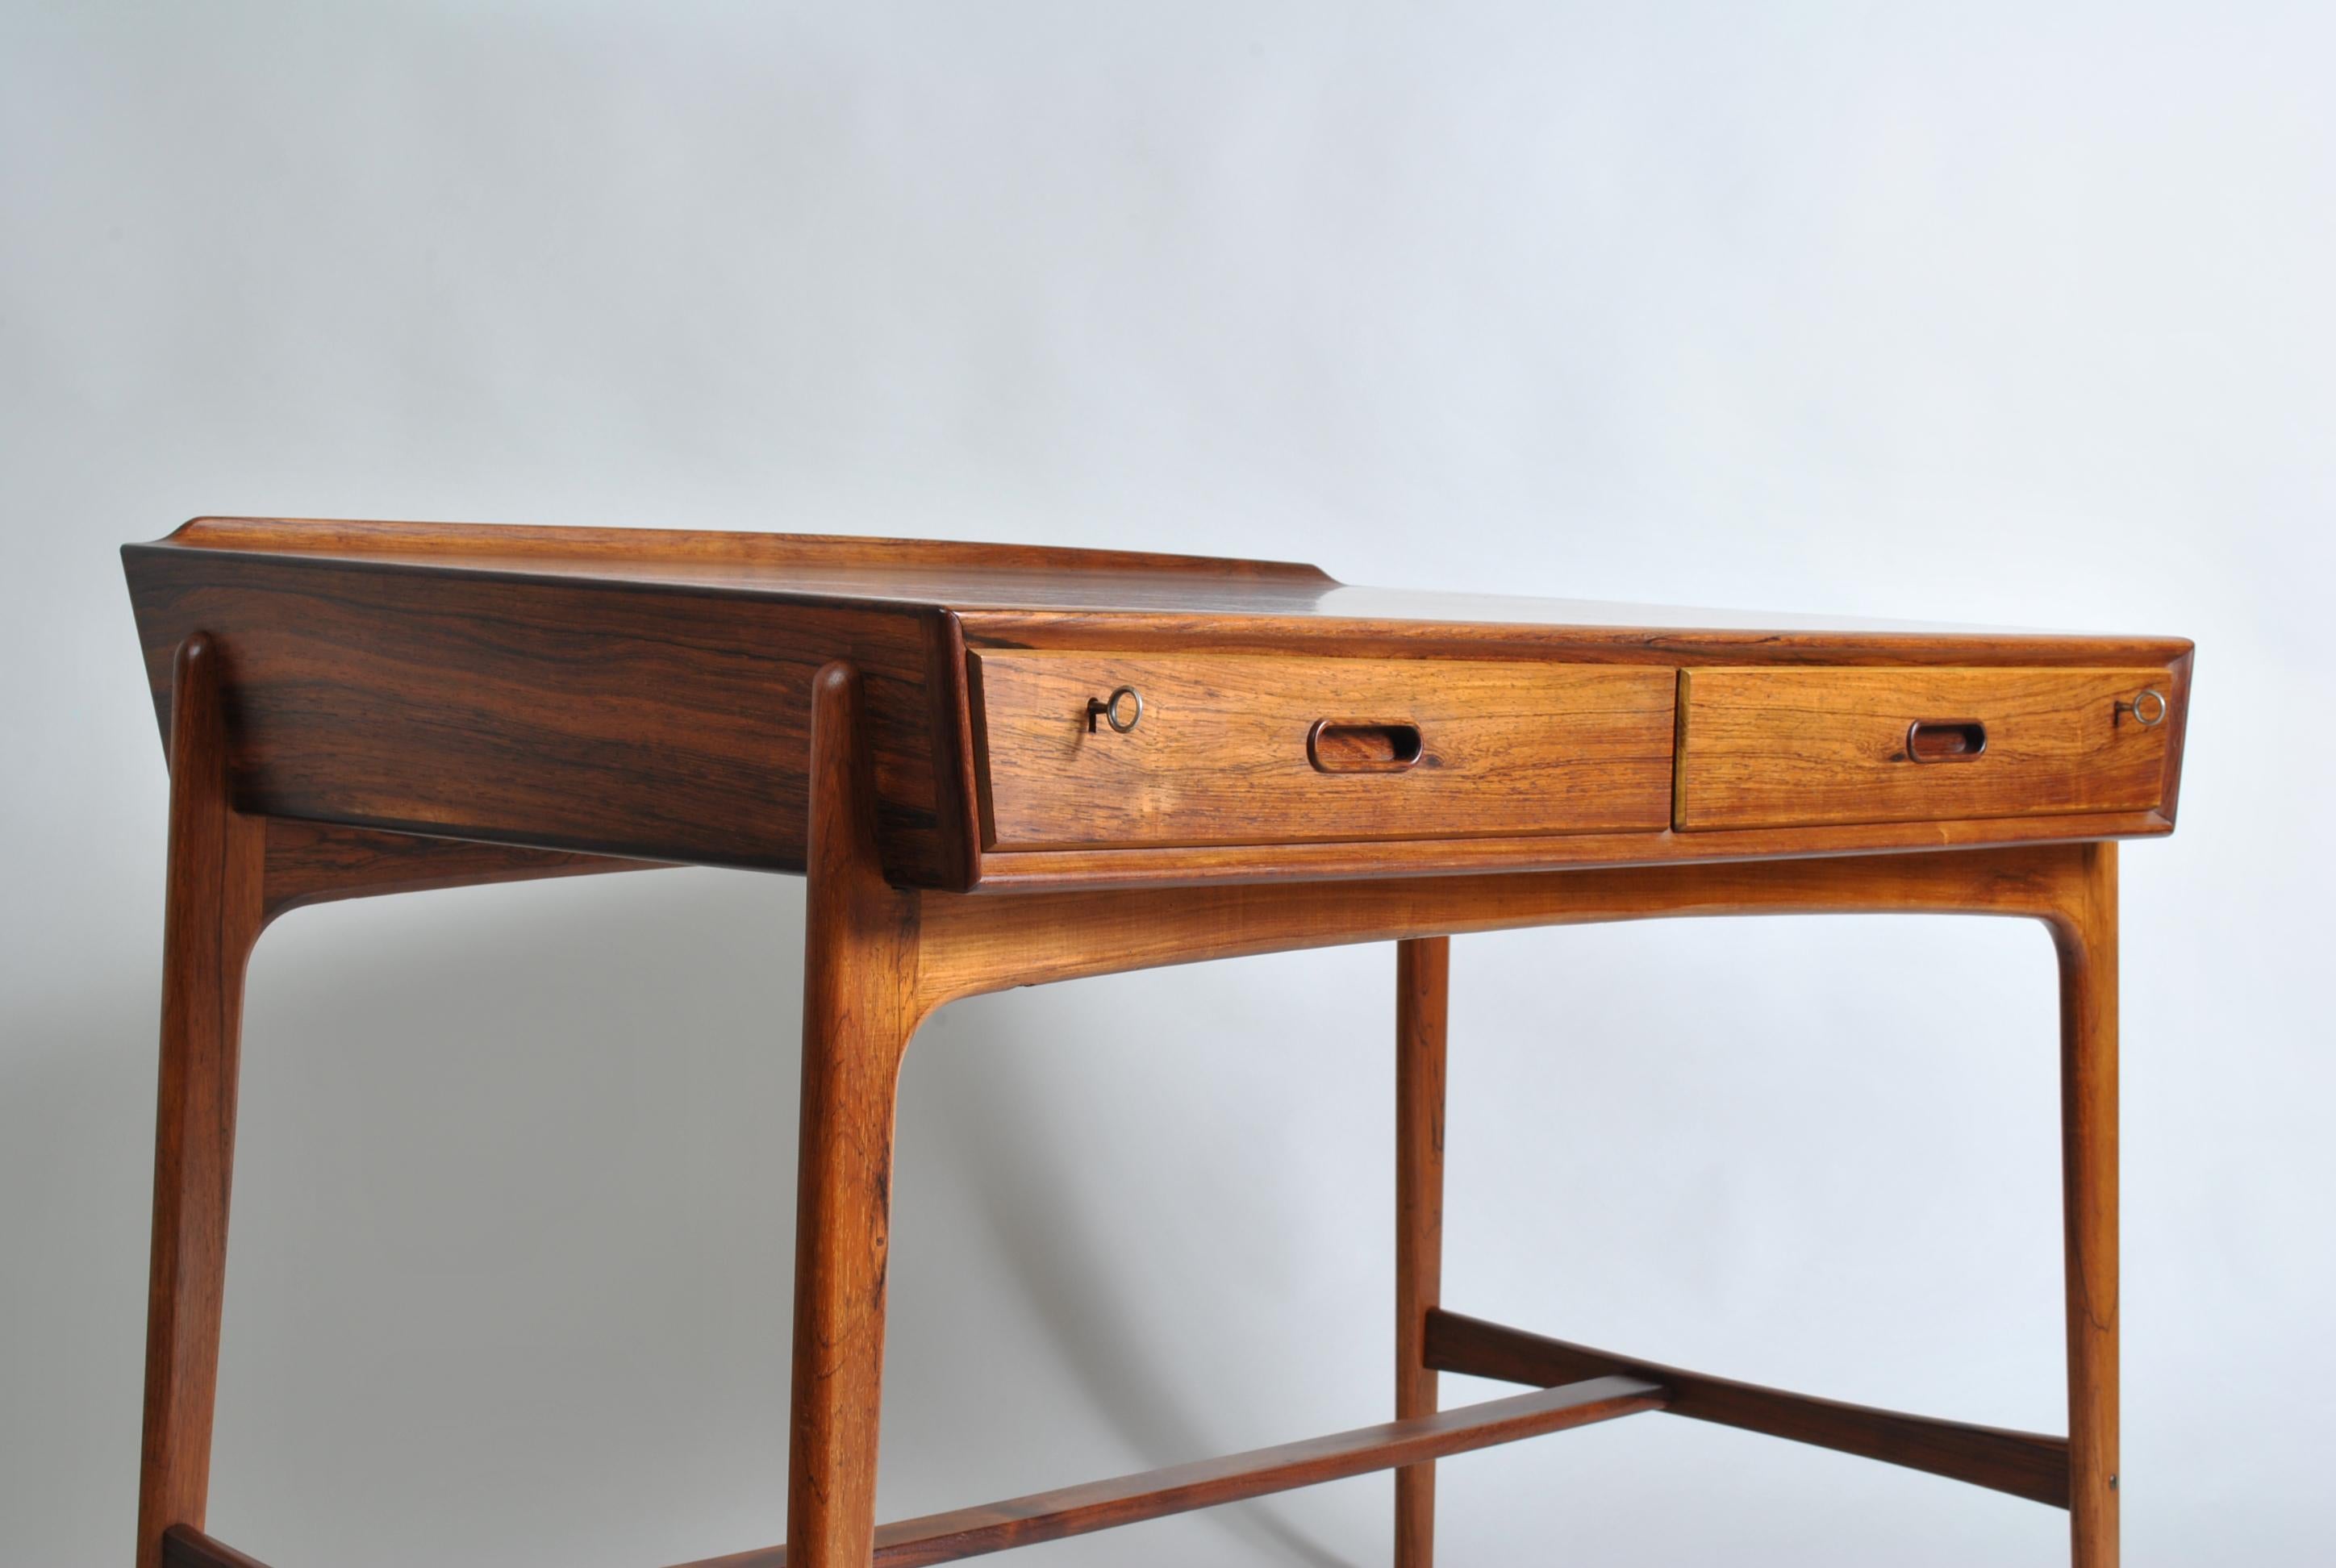 A Svend Aage Madsen desk produced by Sigurd Hansen in Denmark, 1958. A remarkable design by Madsen and beloved by collectors worldwide. Such beautiful shapes and details on what is an extremely practical piece of furniture. Superb craftsmanship. In